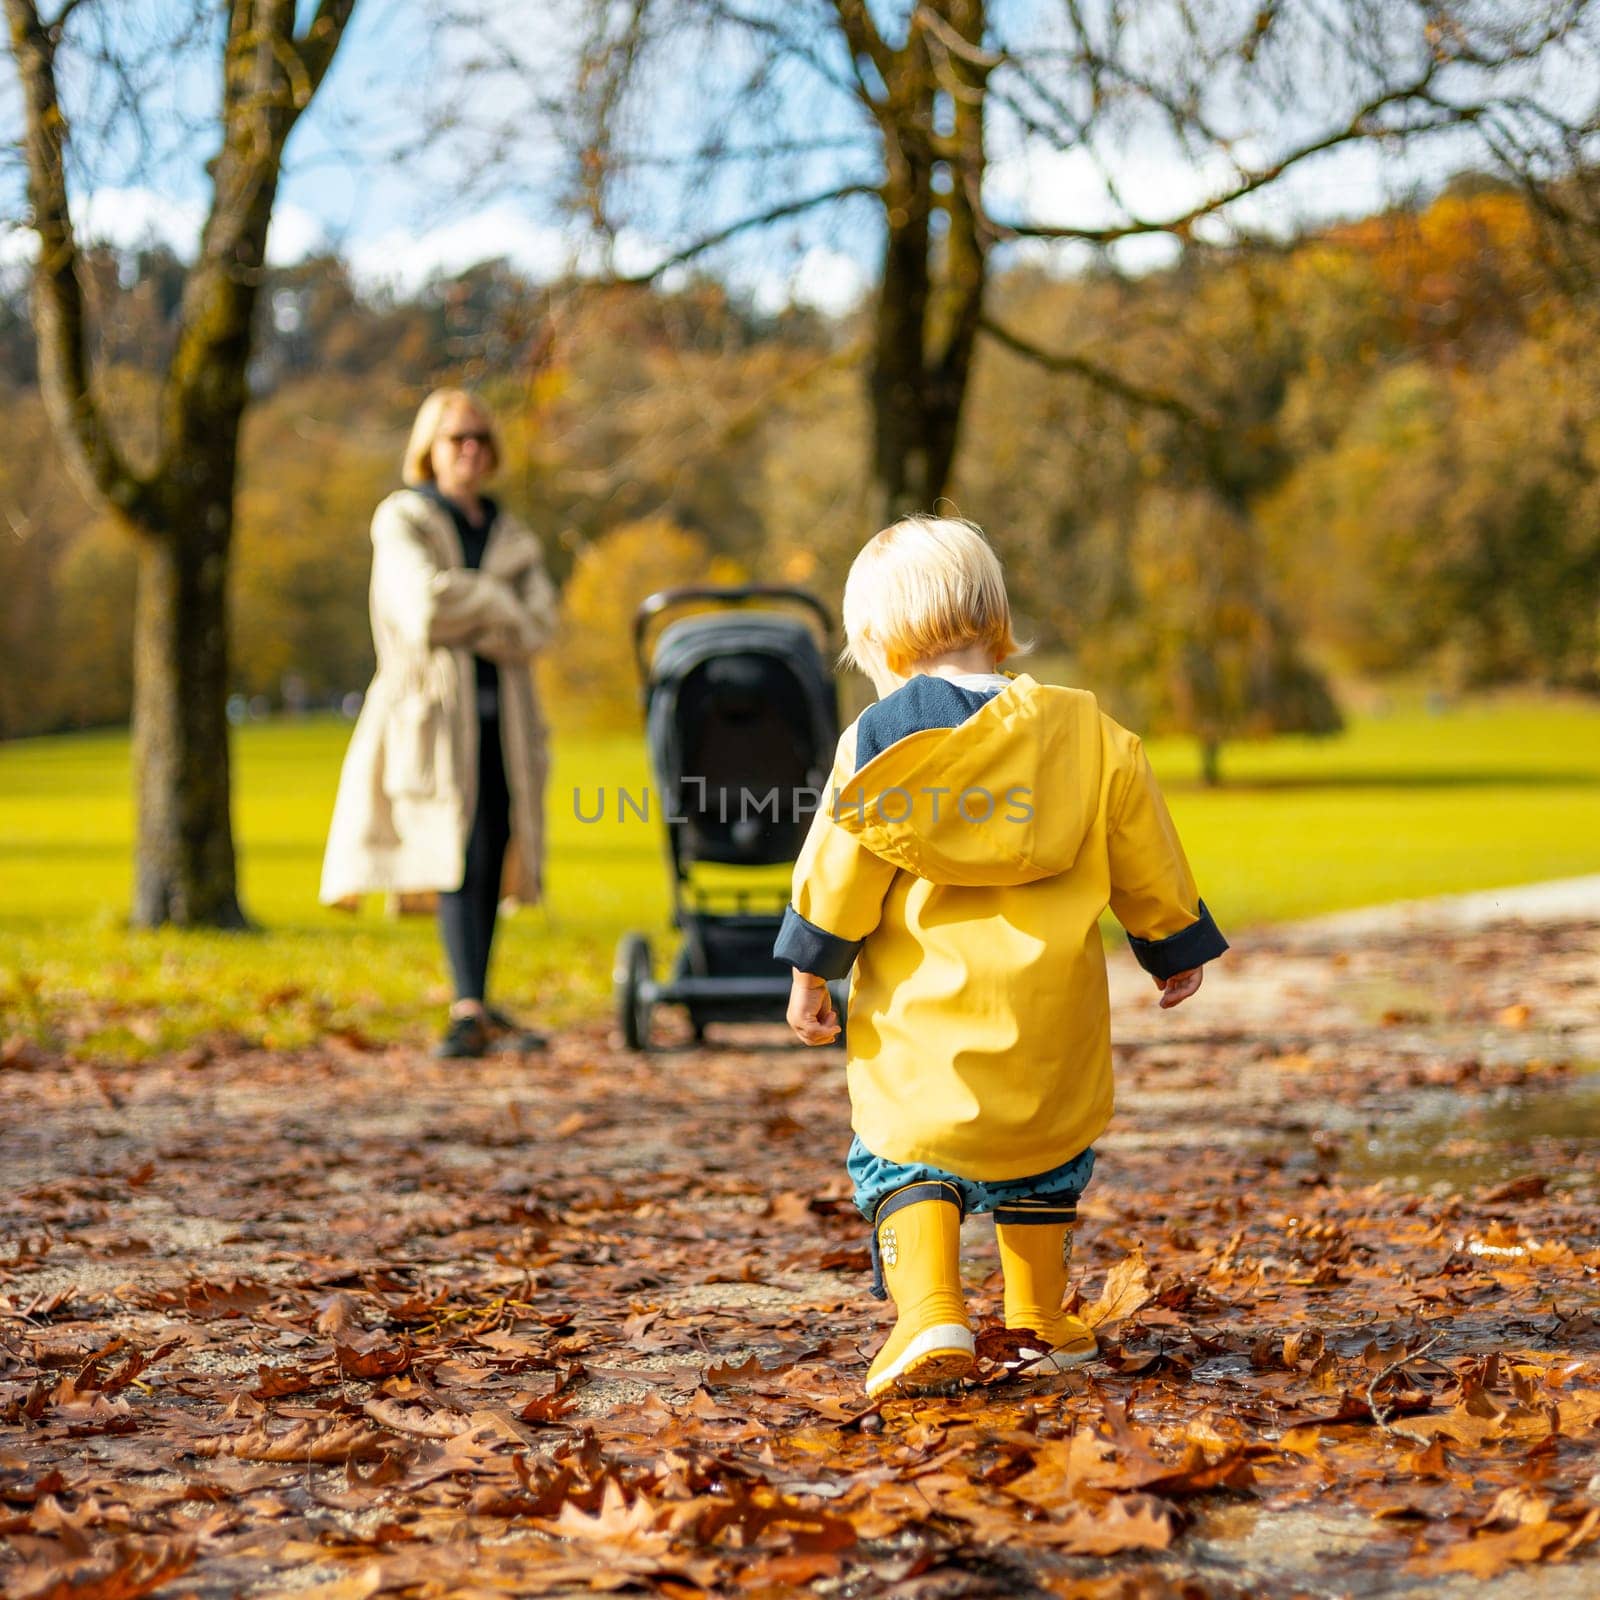 Sun always shines after the rain. Small bond infant boy wearing yellow rubber boots and yellow waterproof raincoat walking in puddles and autumn leaves in city park on sunny rainy day